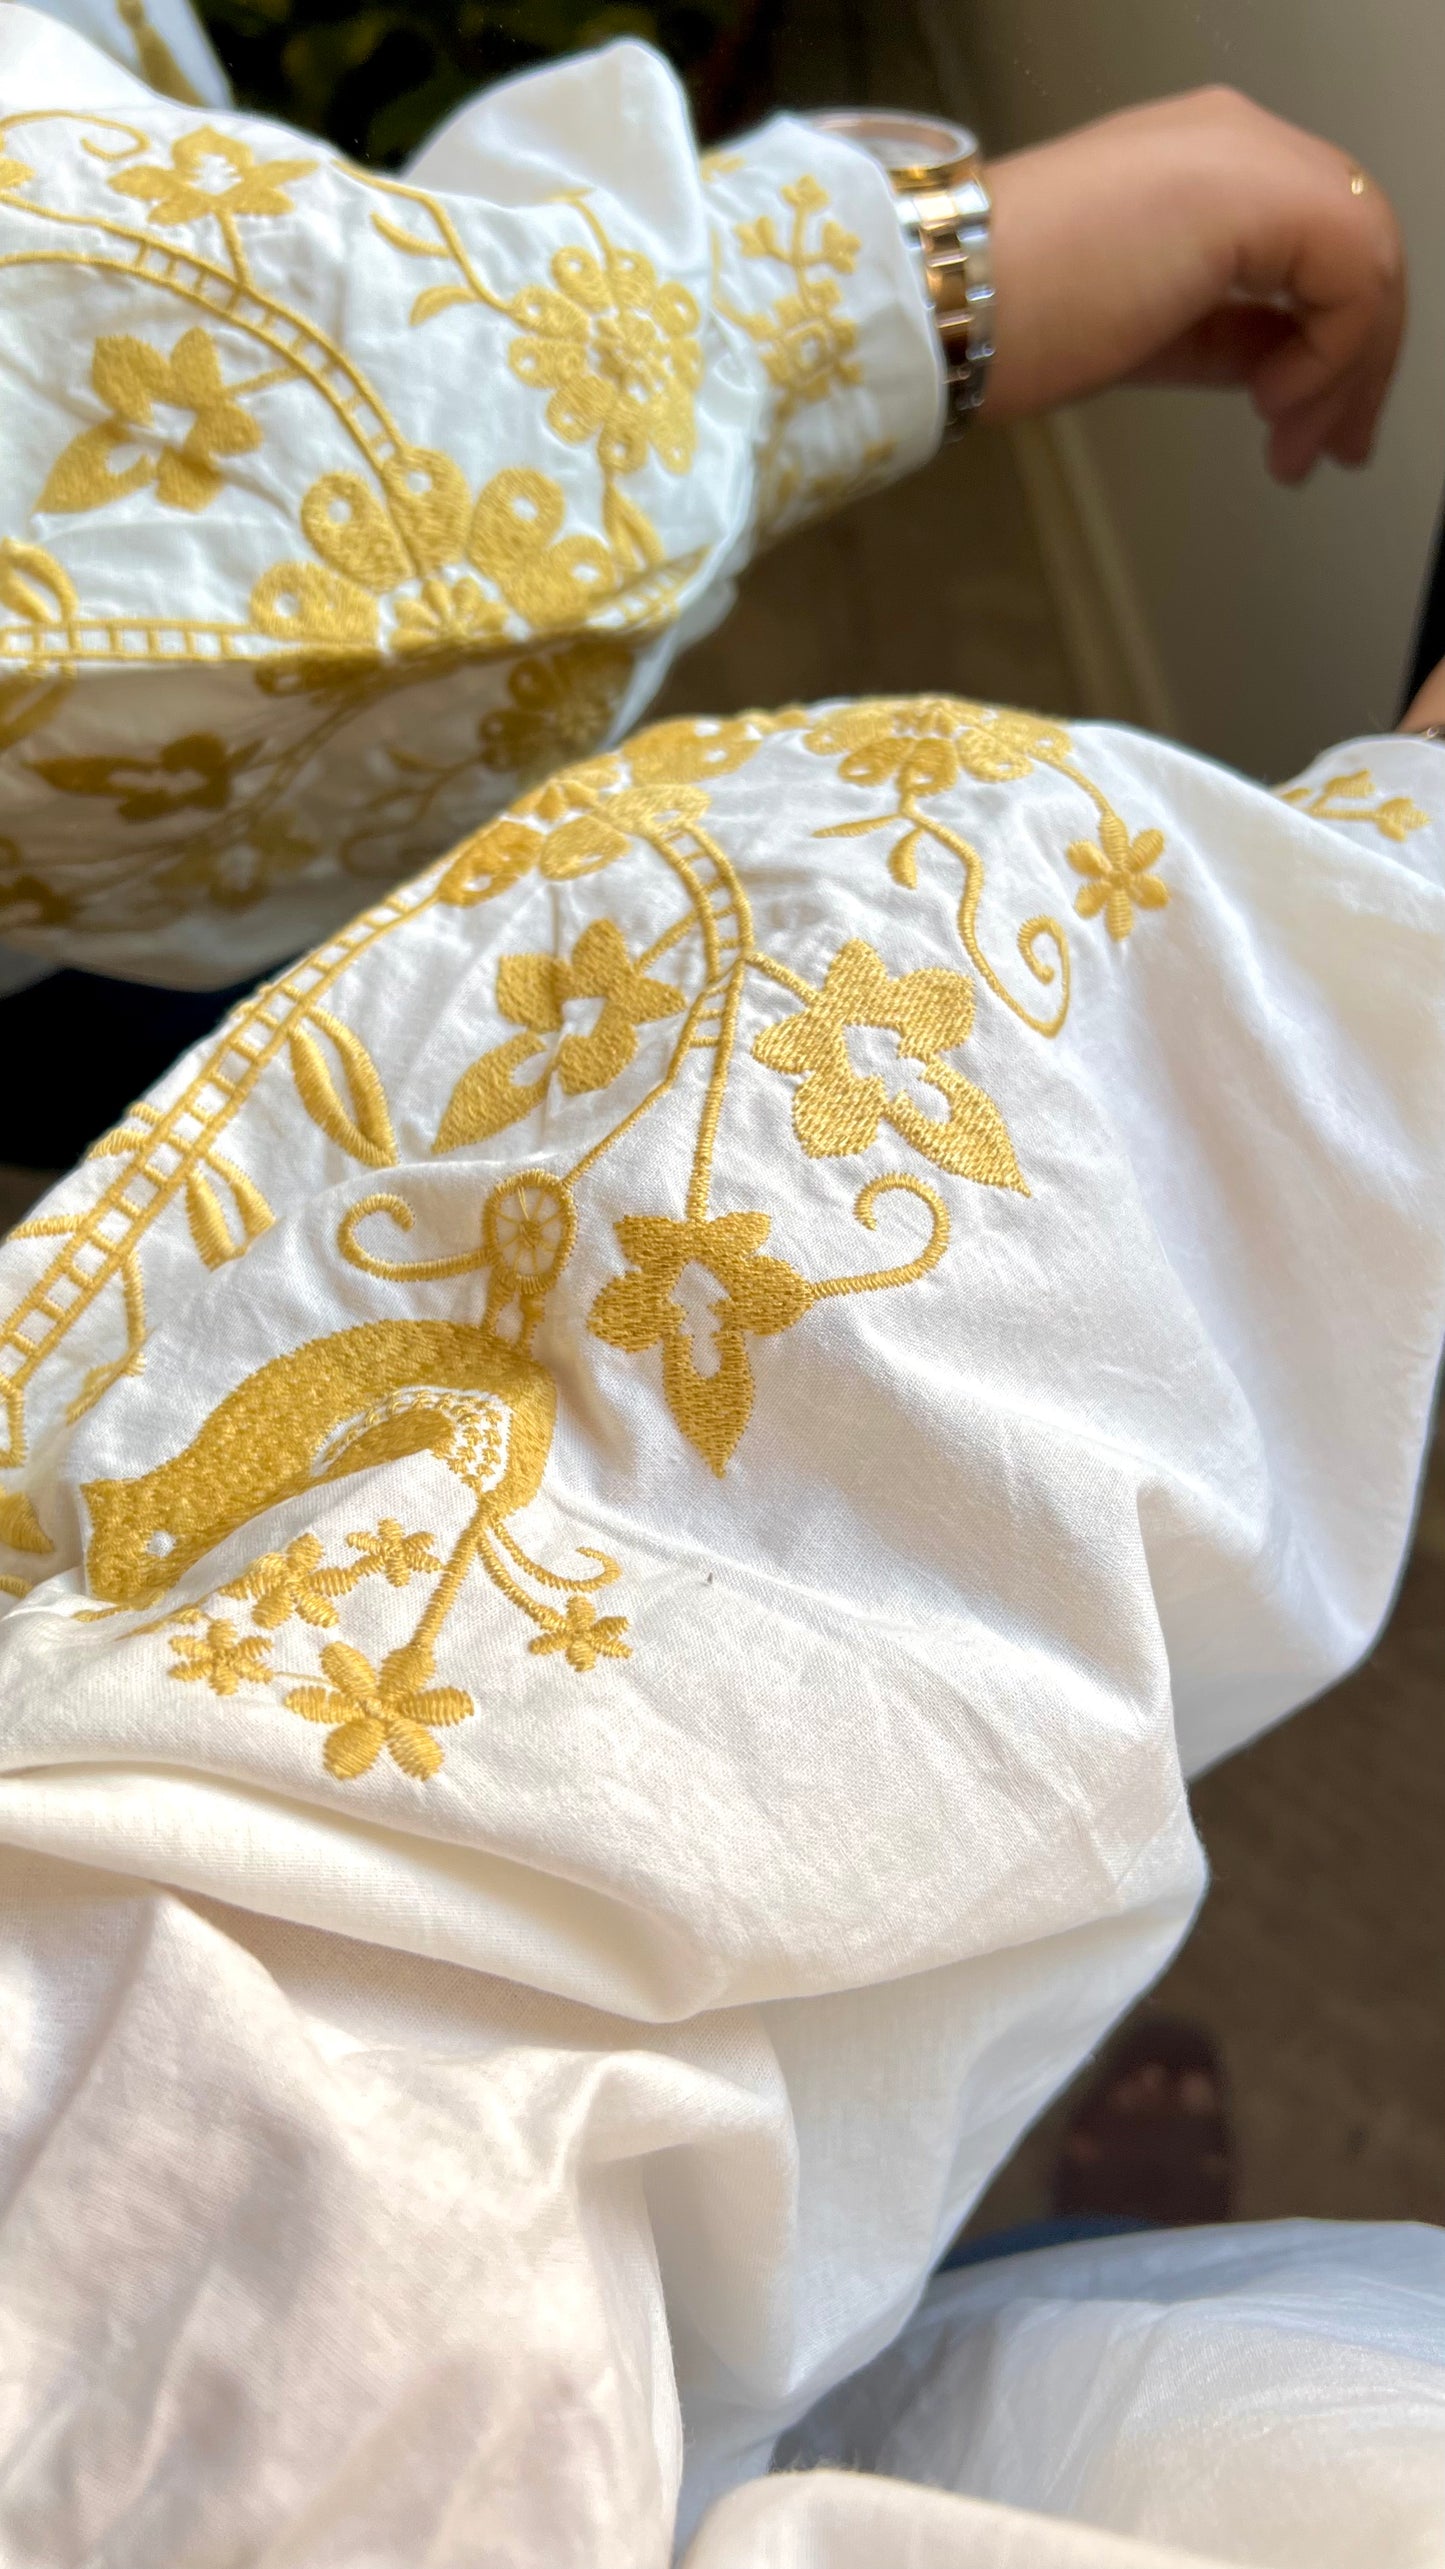 Yellow Embroidered Floral Tasseled Blouse